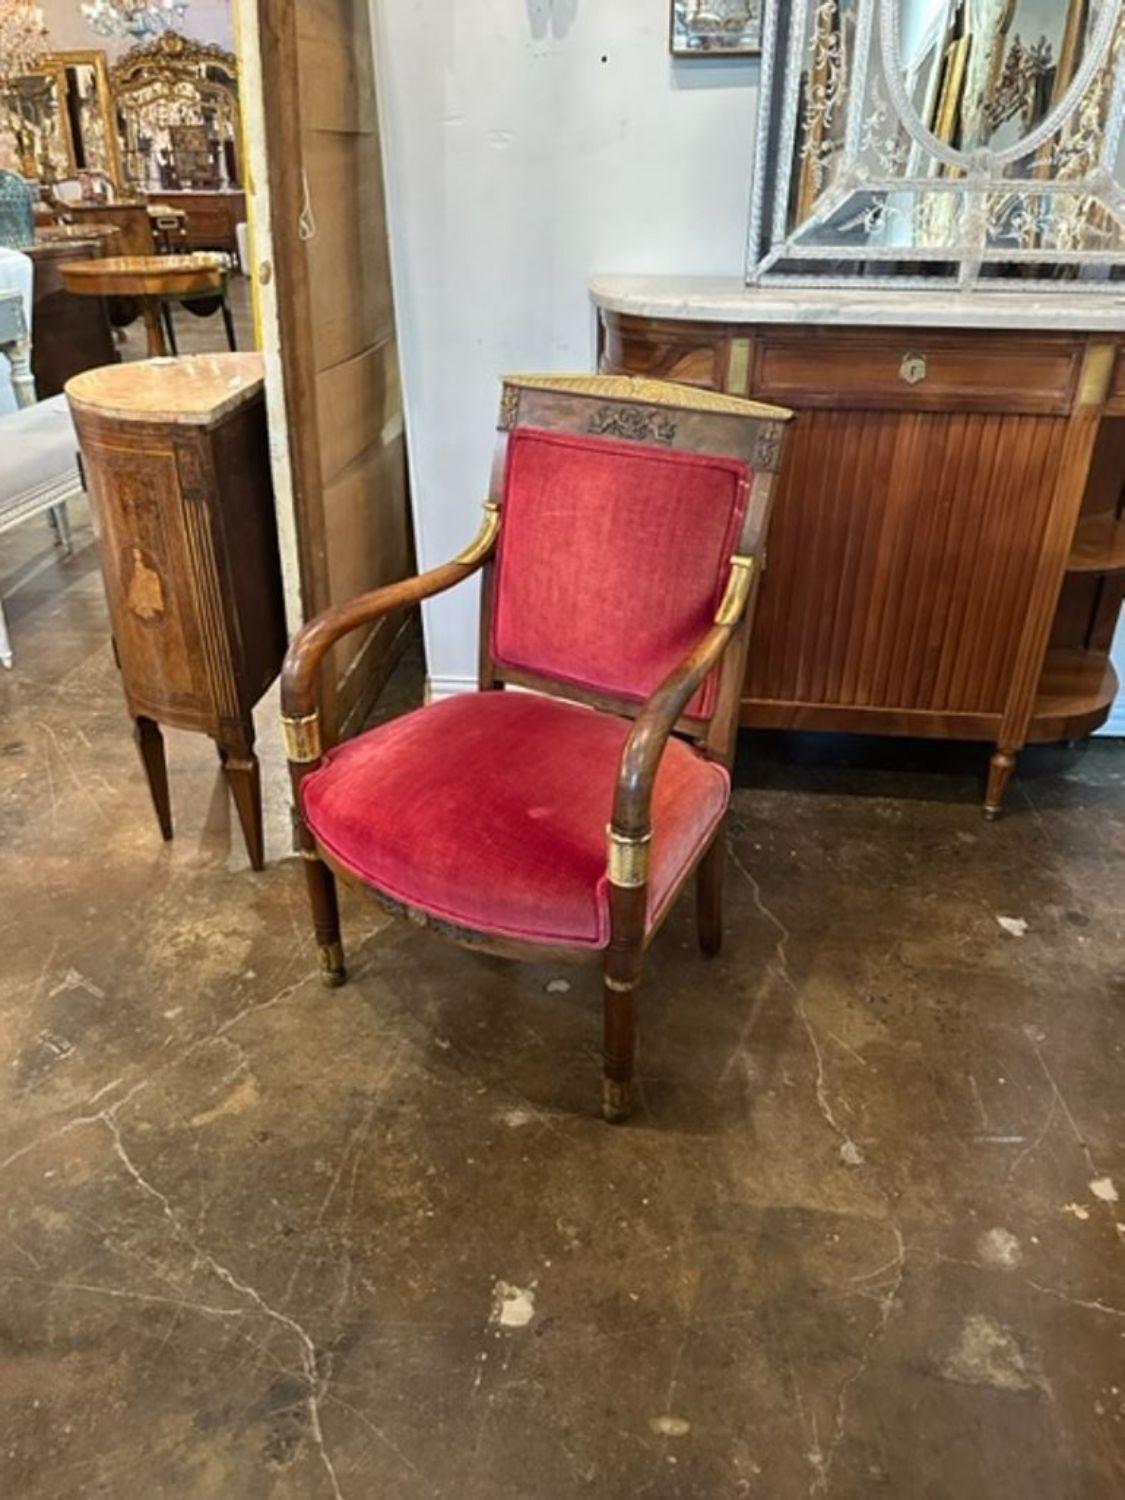 Lovely 19th century French Empire mahogany and gilt armchair. Upholstered in a red velour fabric. Makes an elegant statement!!